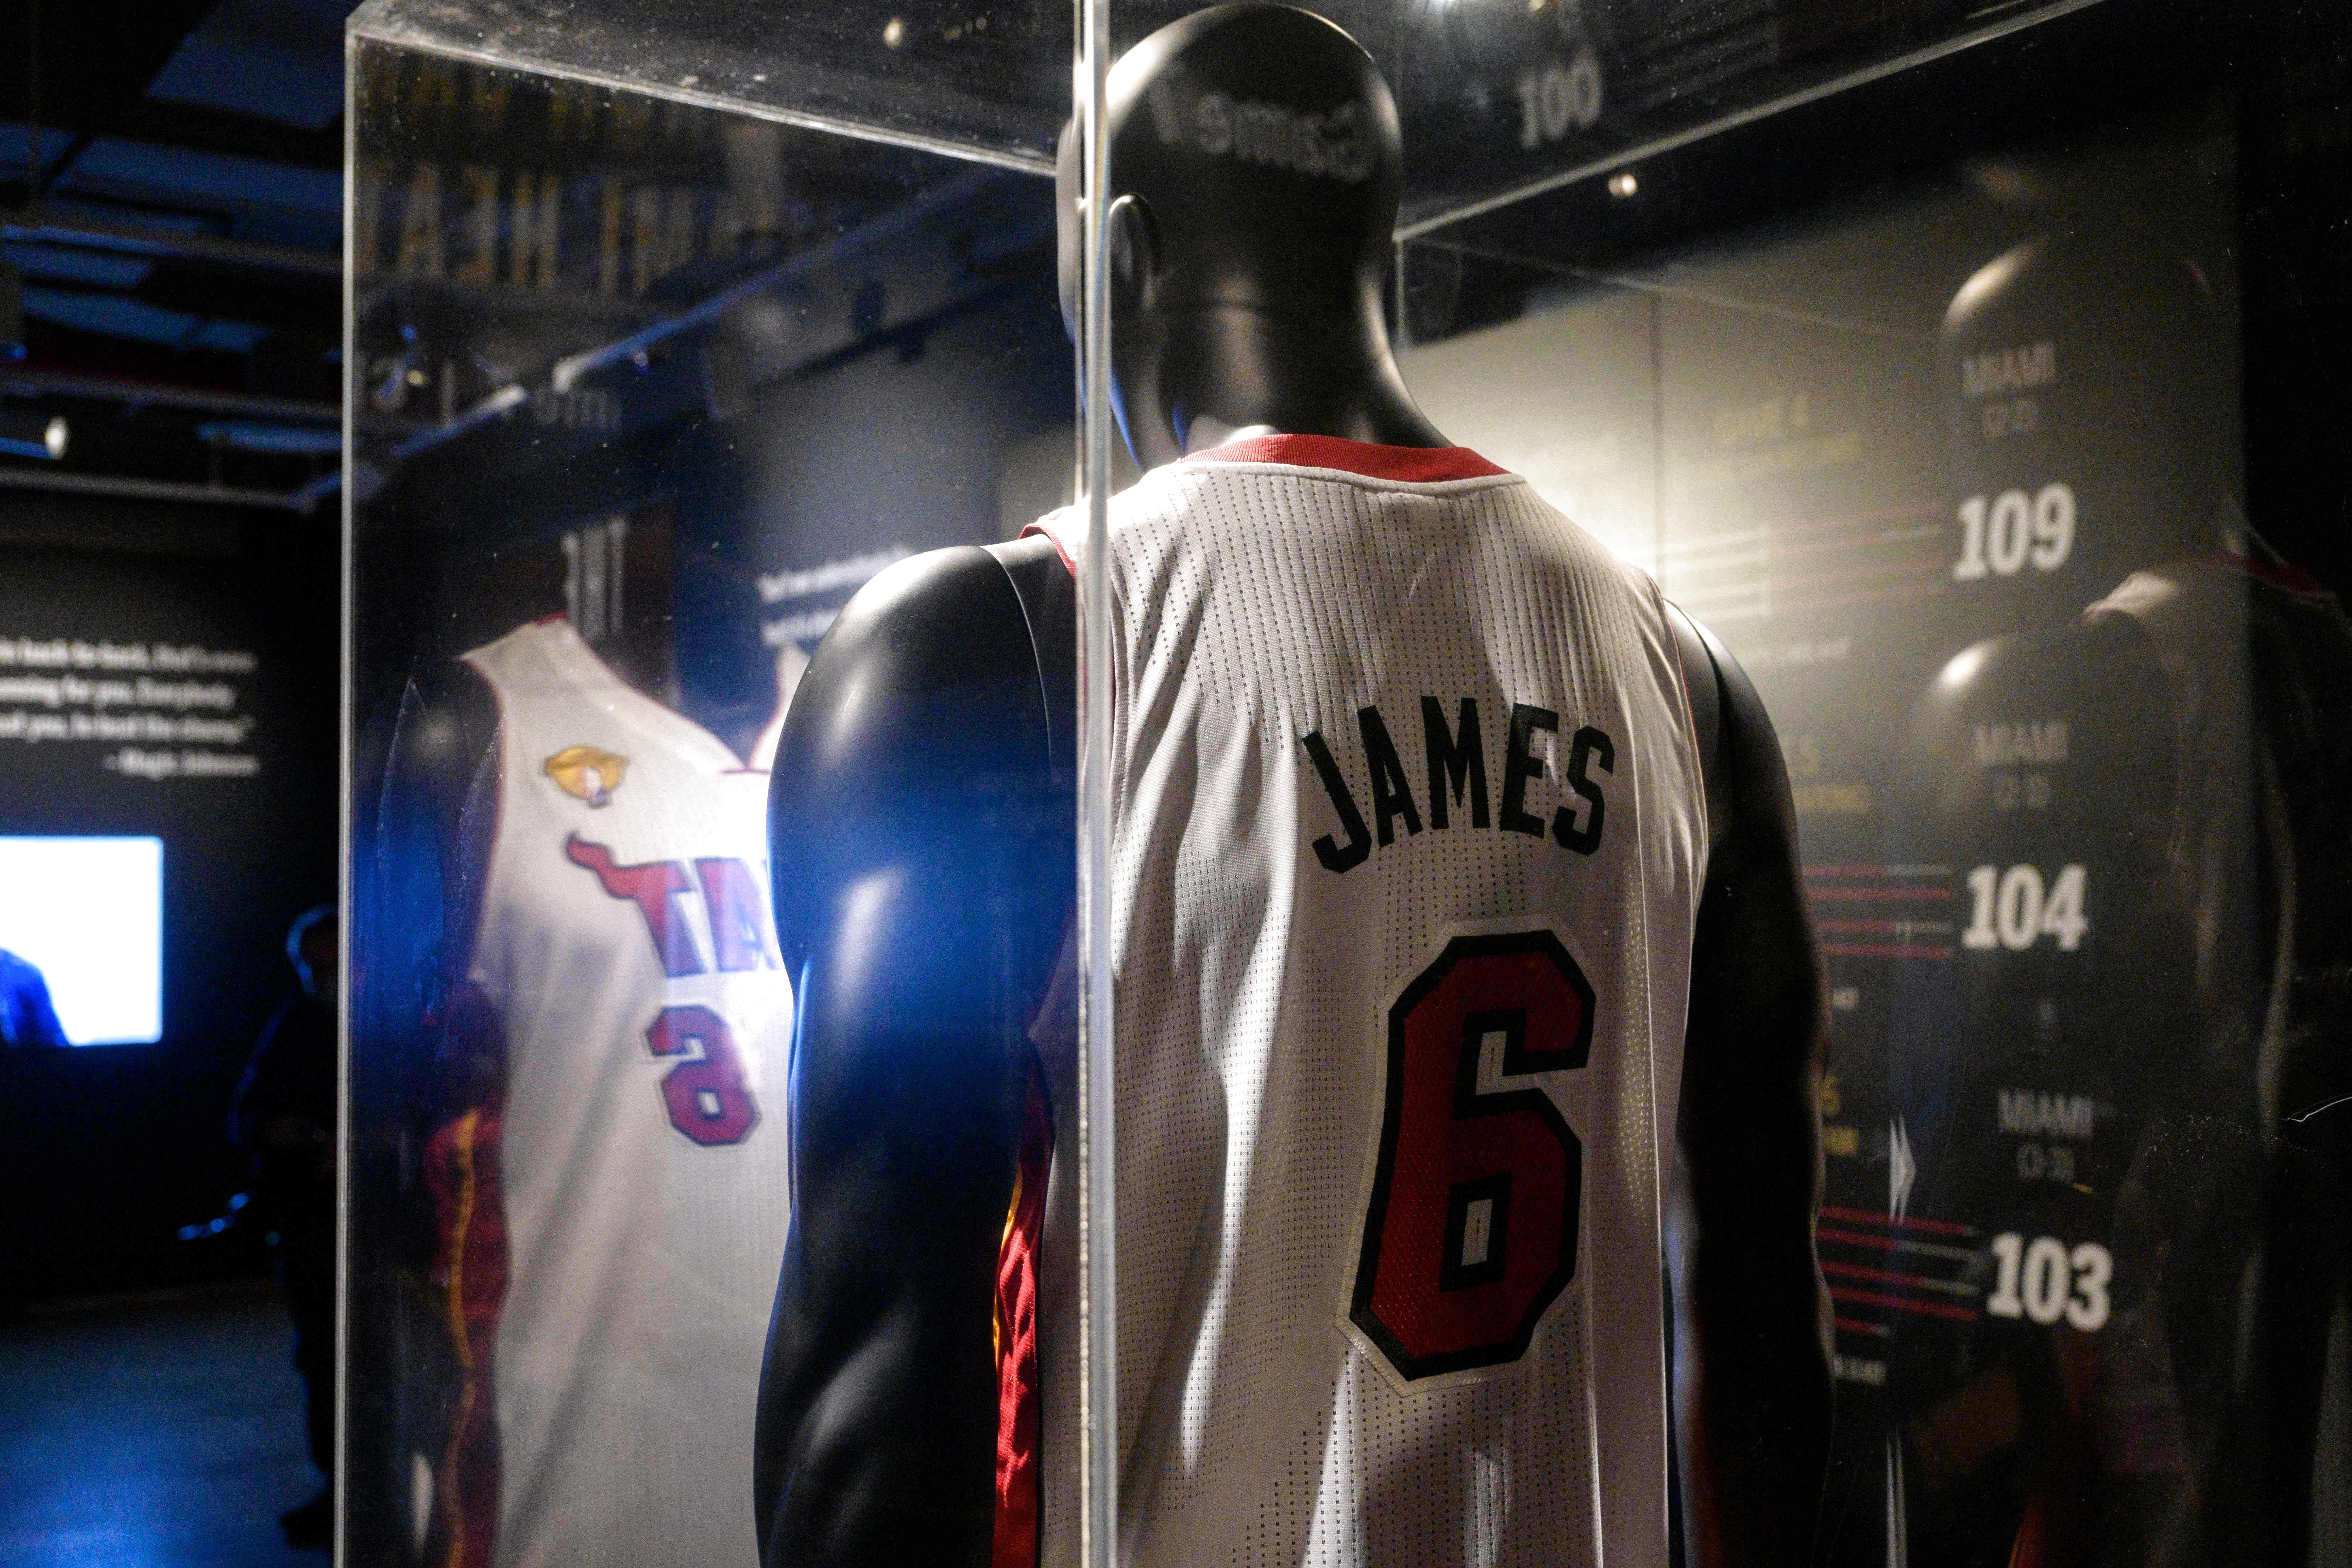 LeBron once again tops the NBA's best-selling jerseys list for the